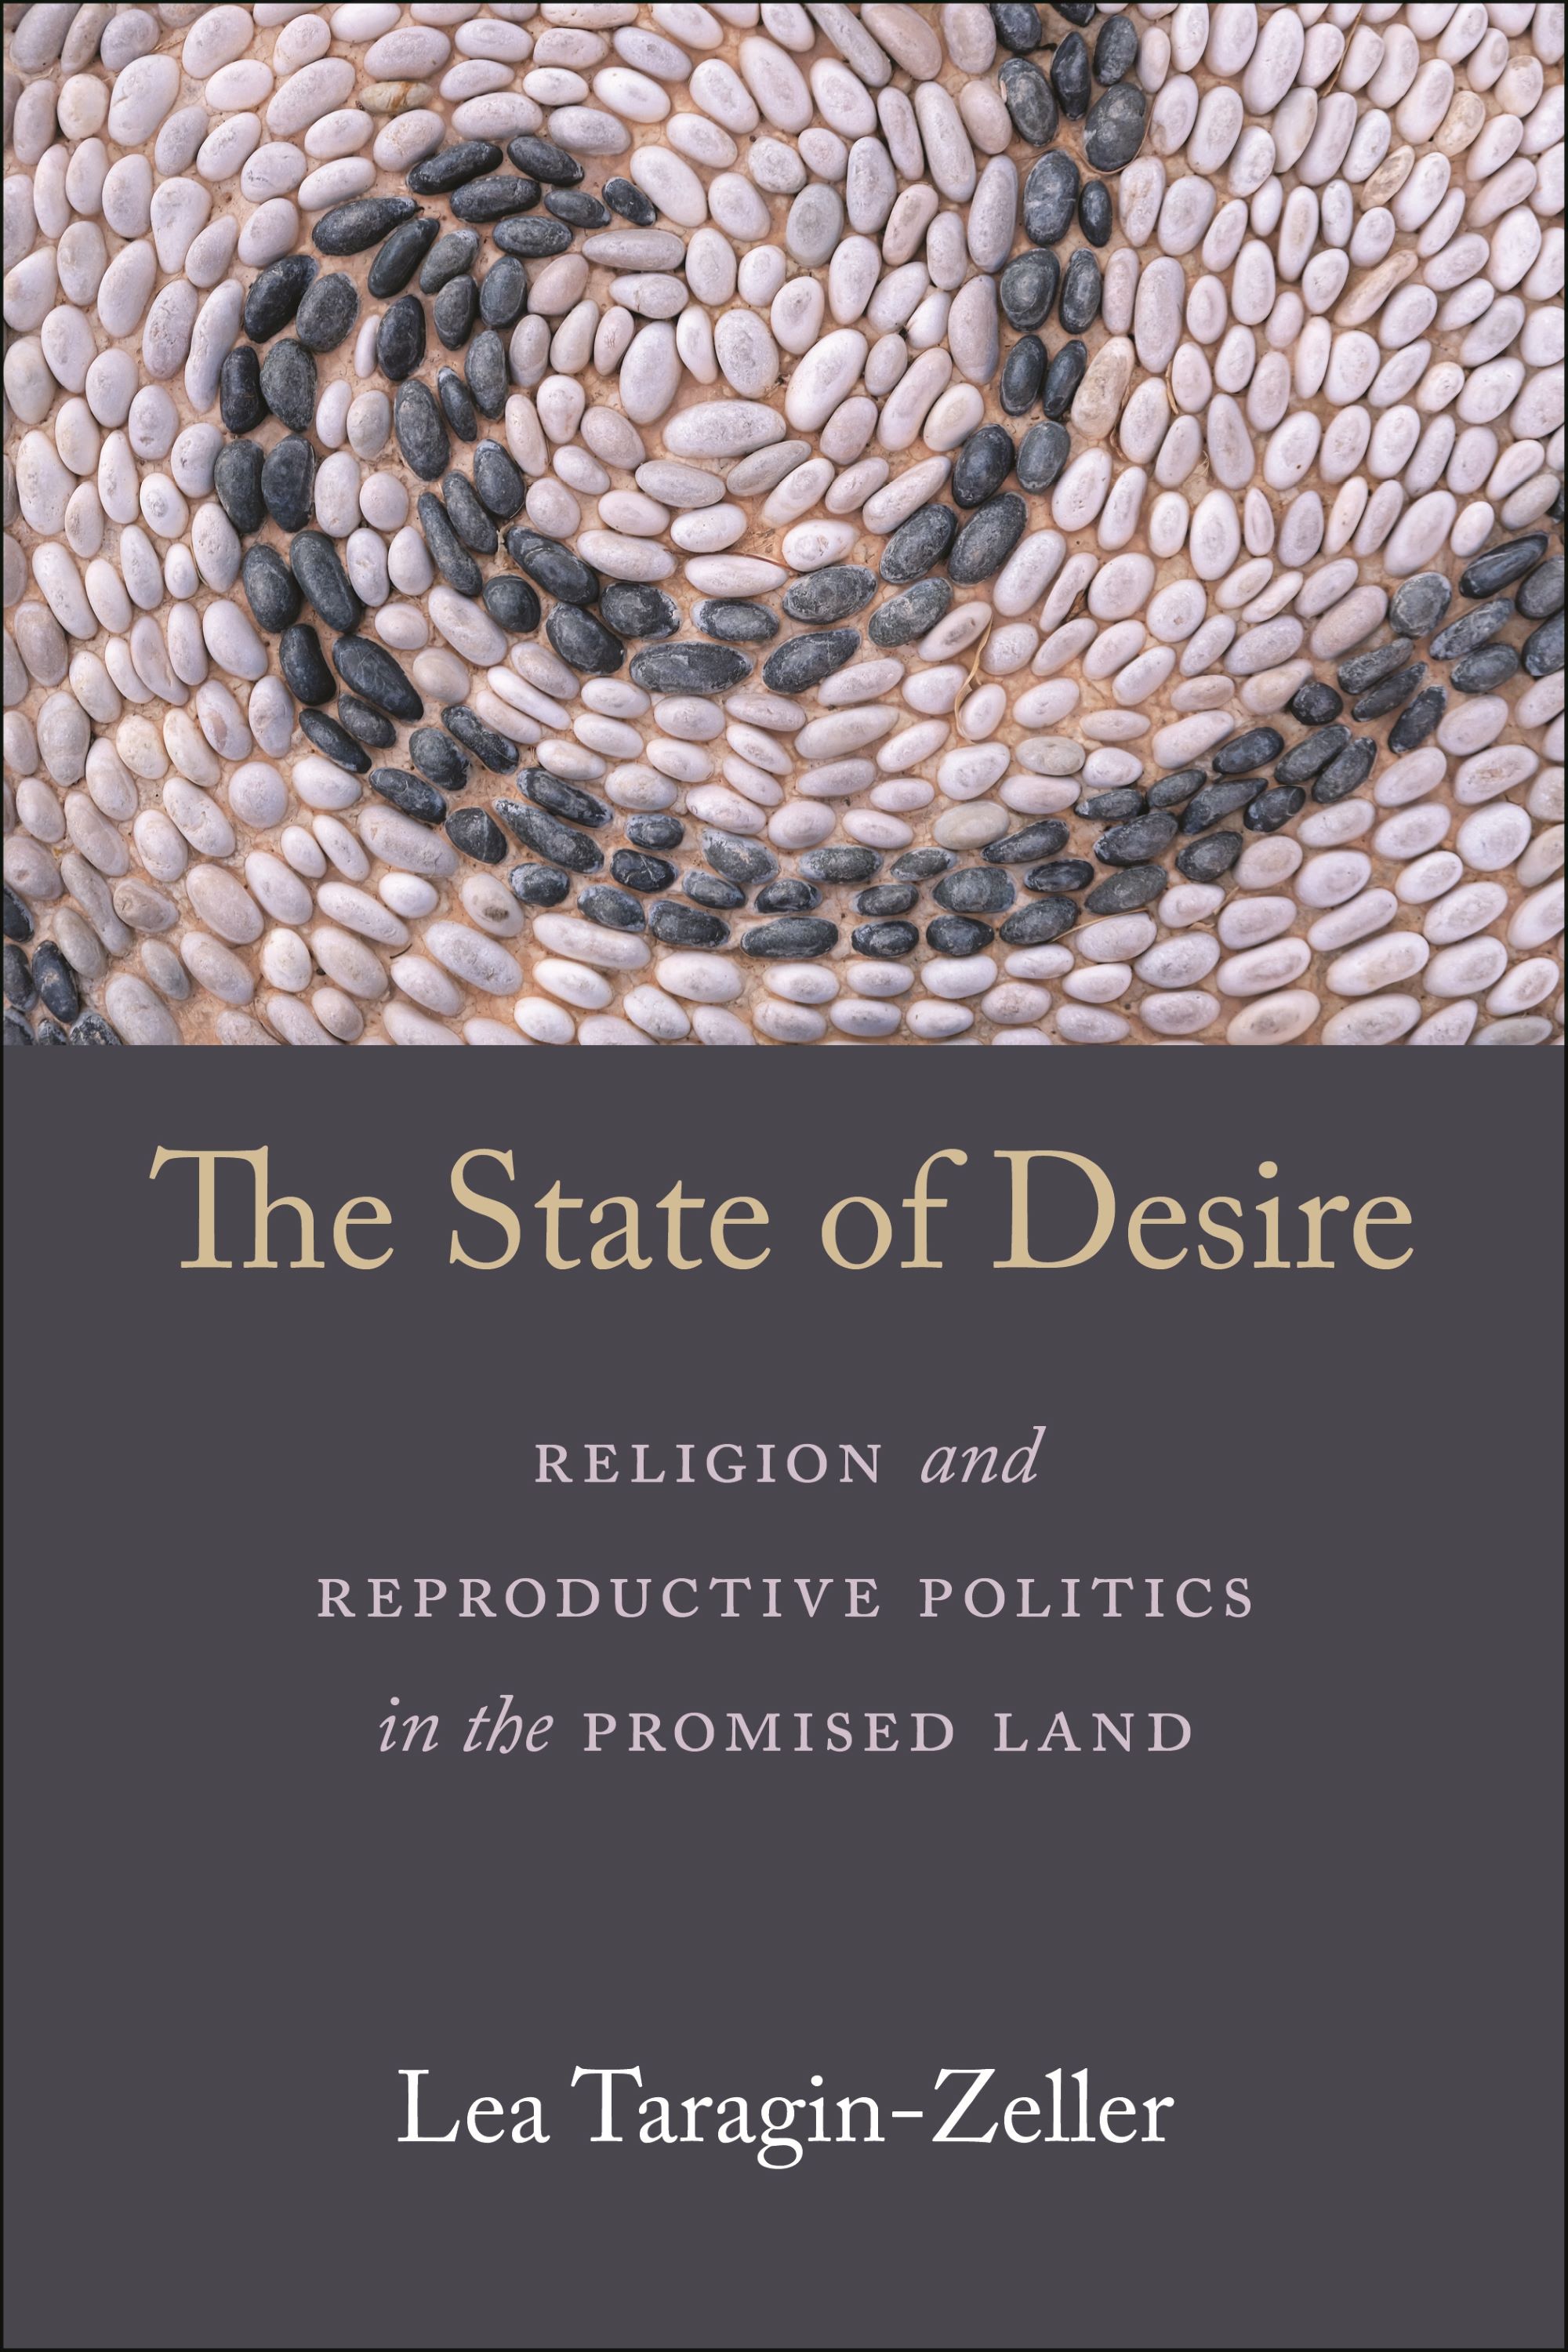 Seeds arranged in a decorative pattern, with the book title (The State of Desire) superimposed